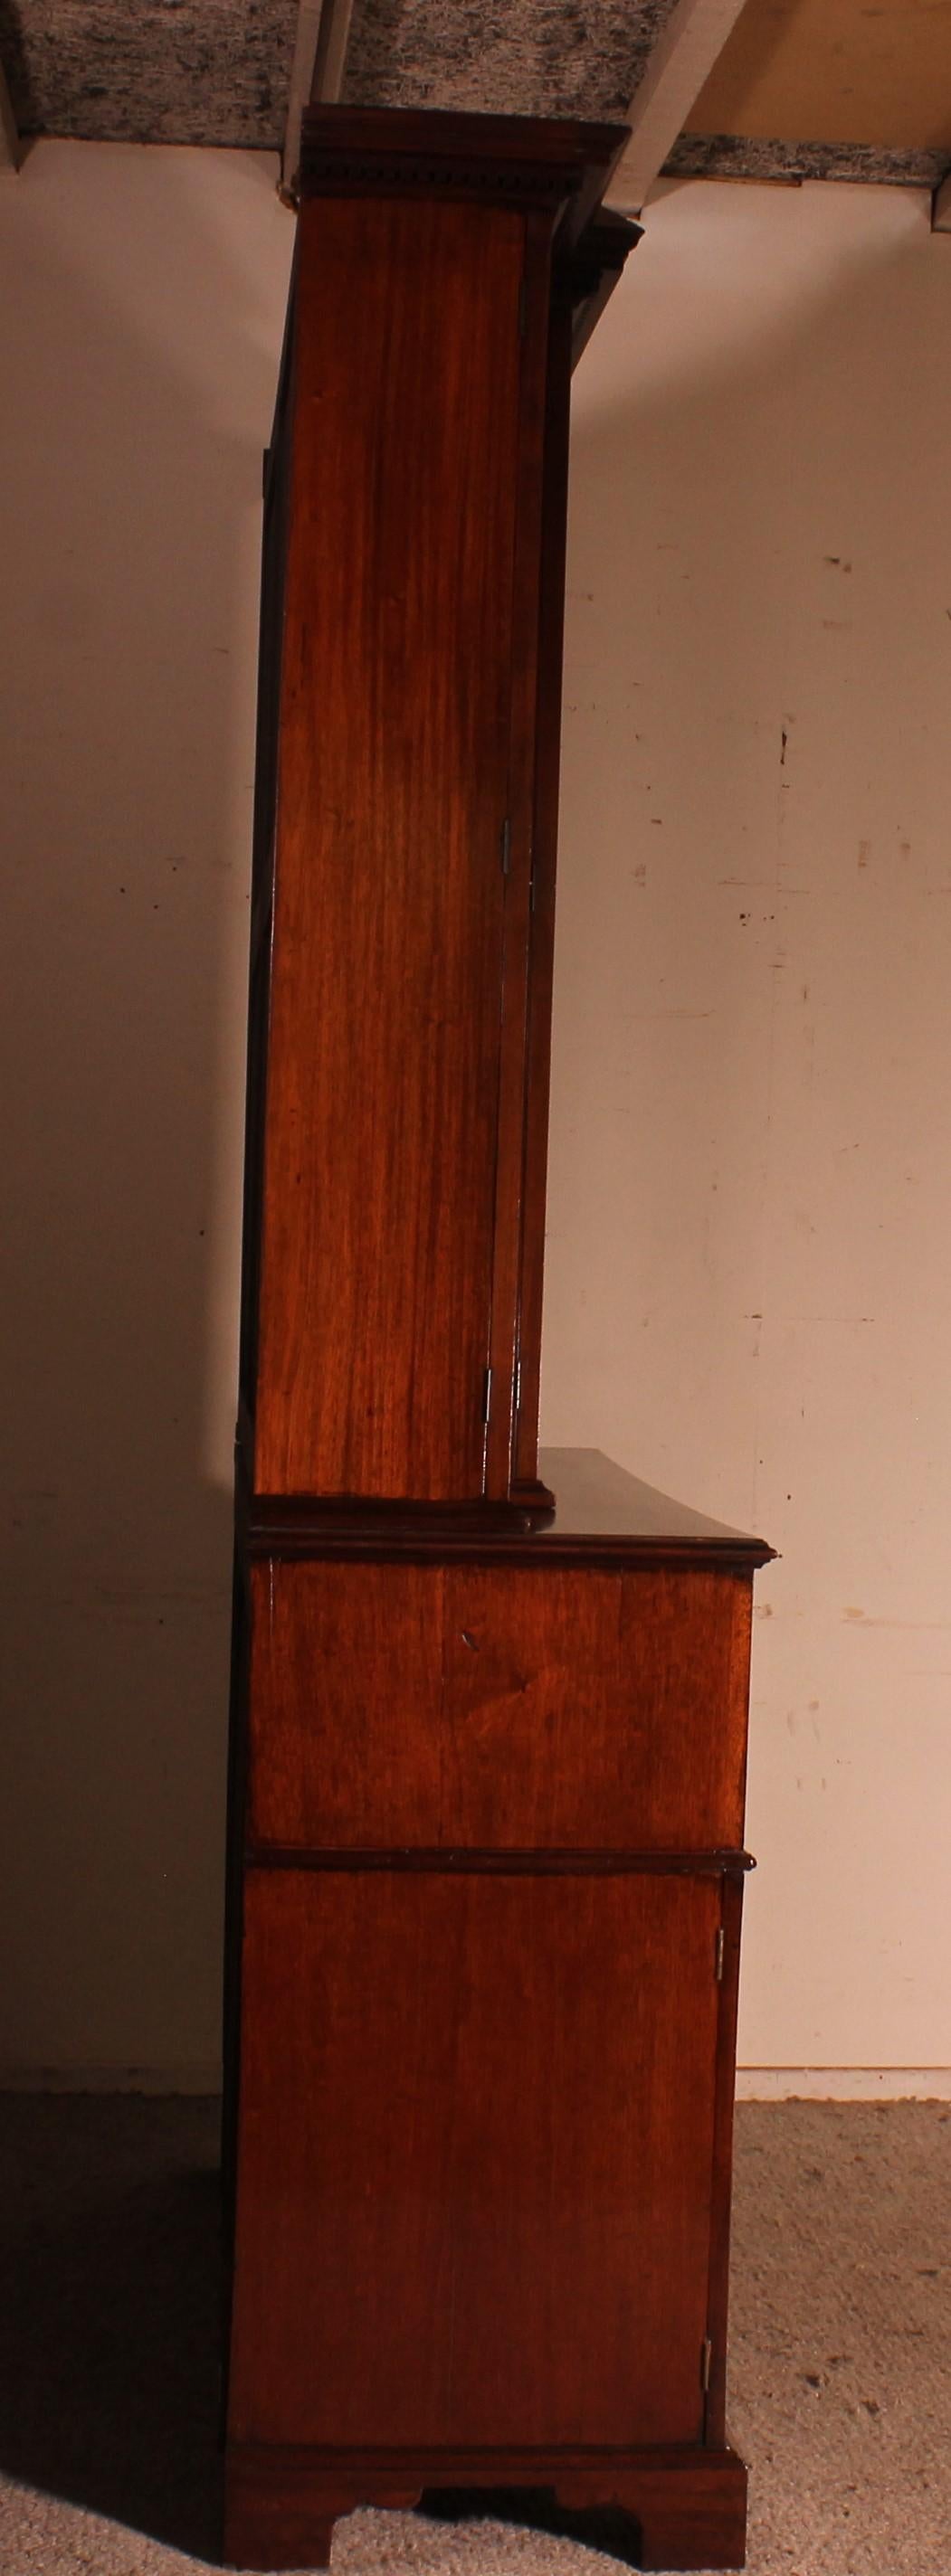 Mahogany Showcase Cabinet Or Library From The 18th Century For Sale 5